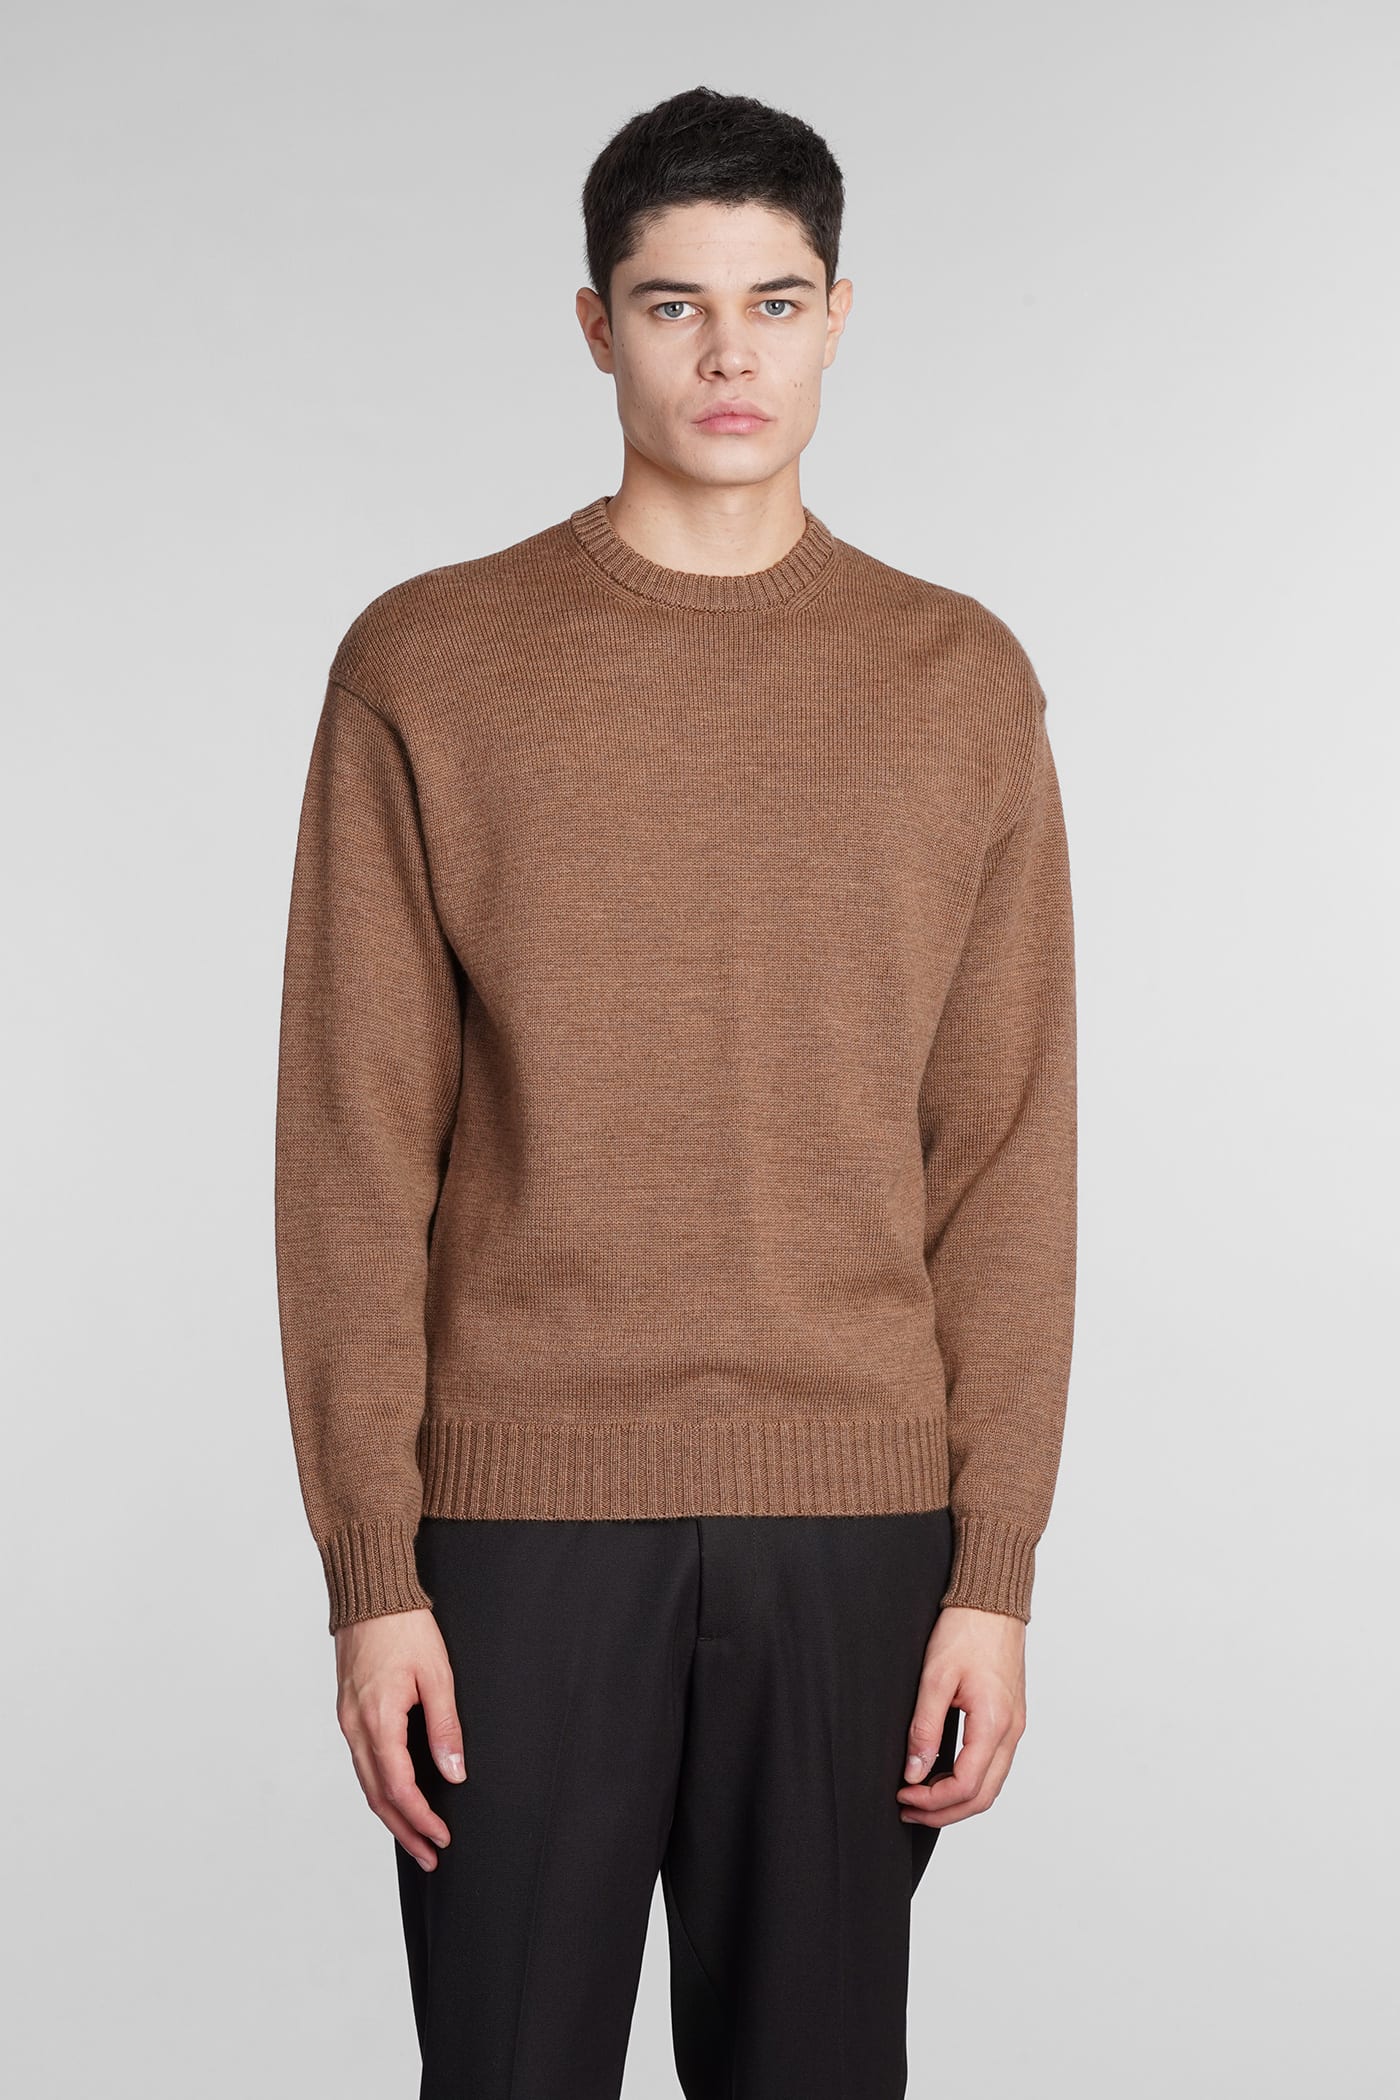 Low Brand Knitwear In Leather Color Wool